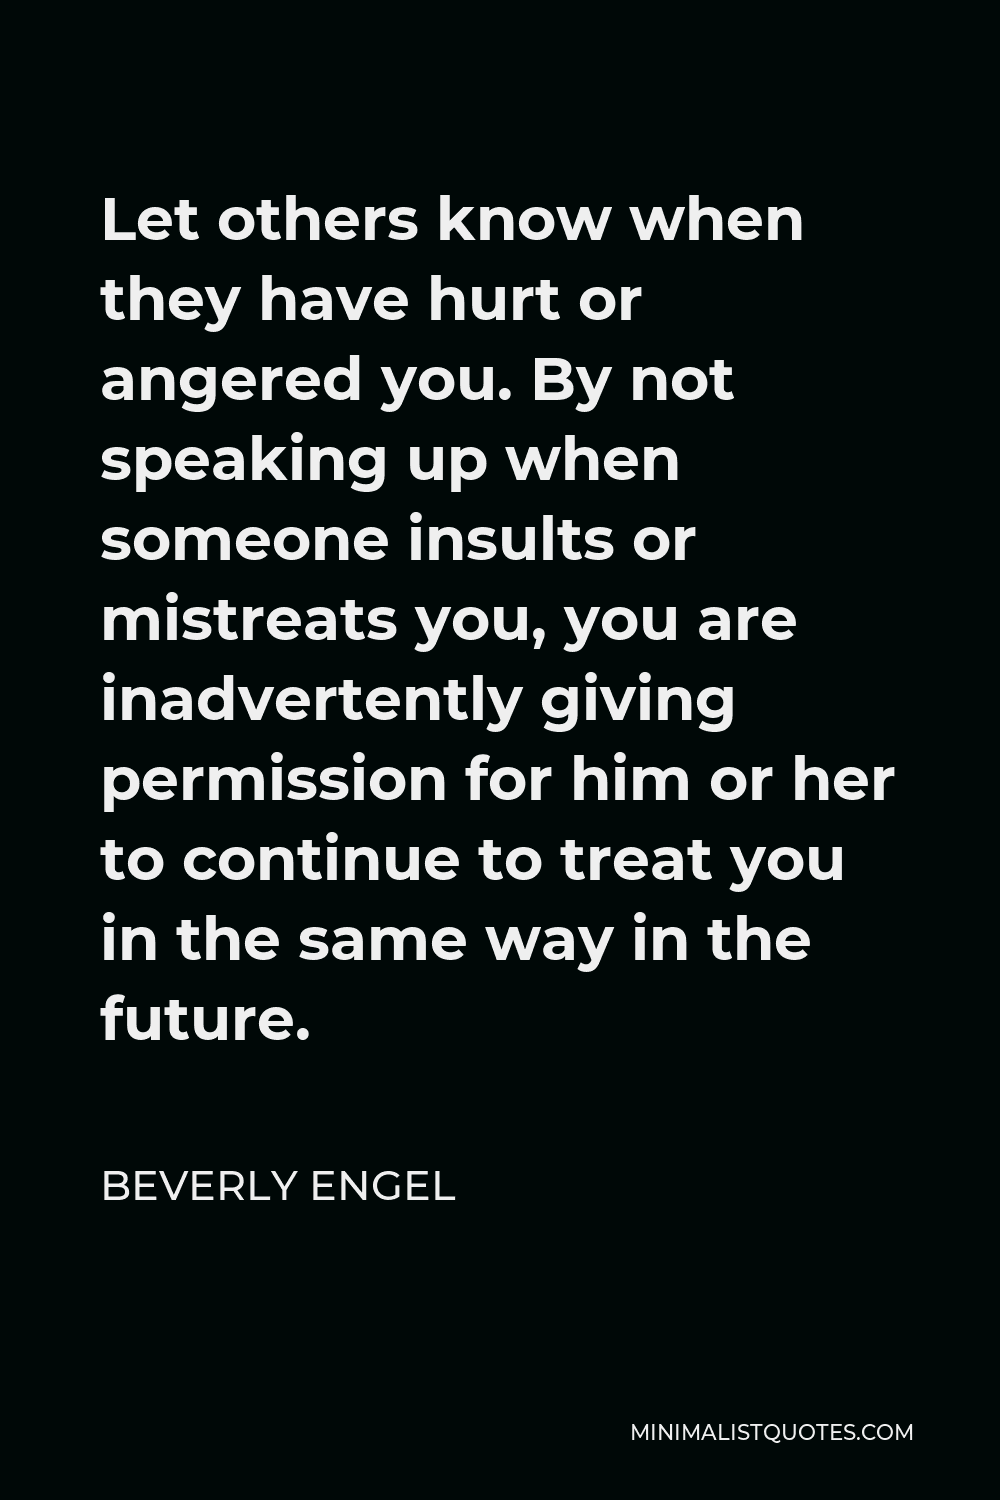 Beverly Engel Quote - Let others know when they have hurt or angered you. By not speaking up when someone insults or mistreats you, you are inadvertently giving permission for him or her to continue to treat you in the same way in the future.